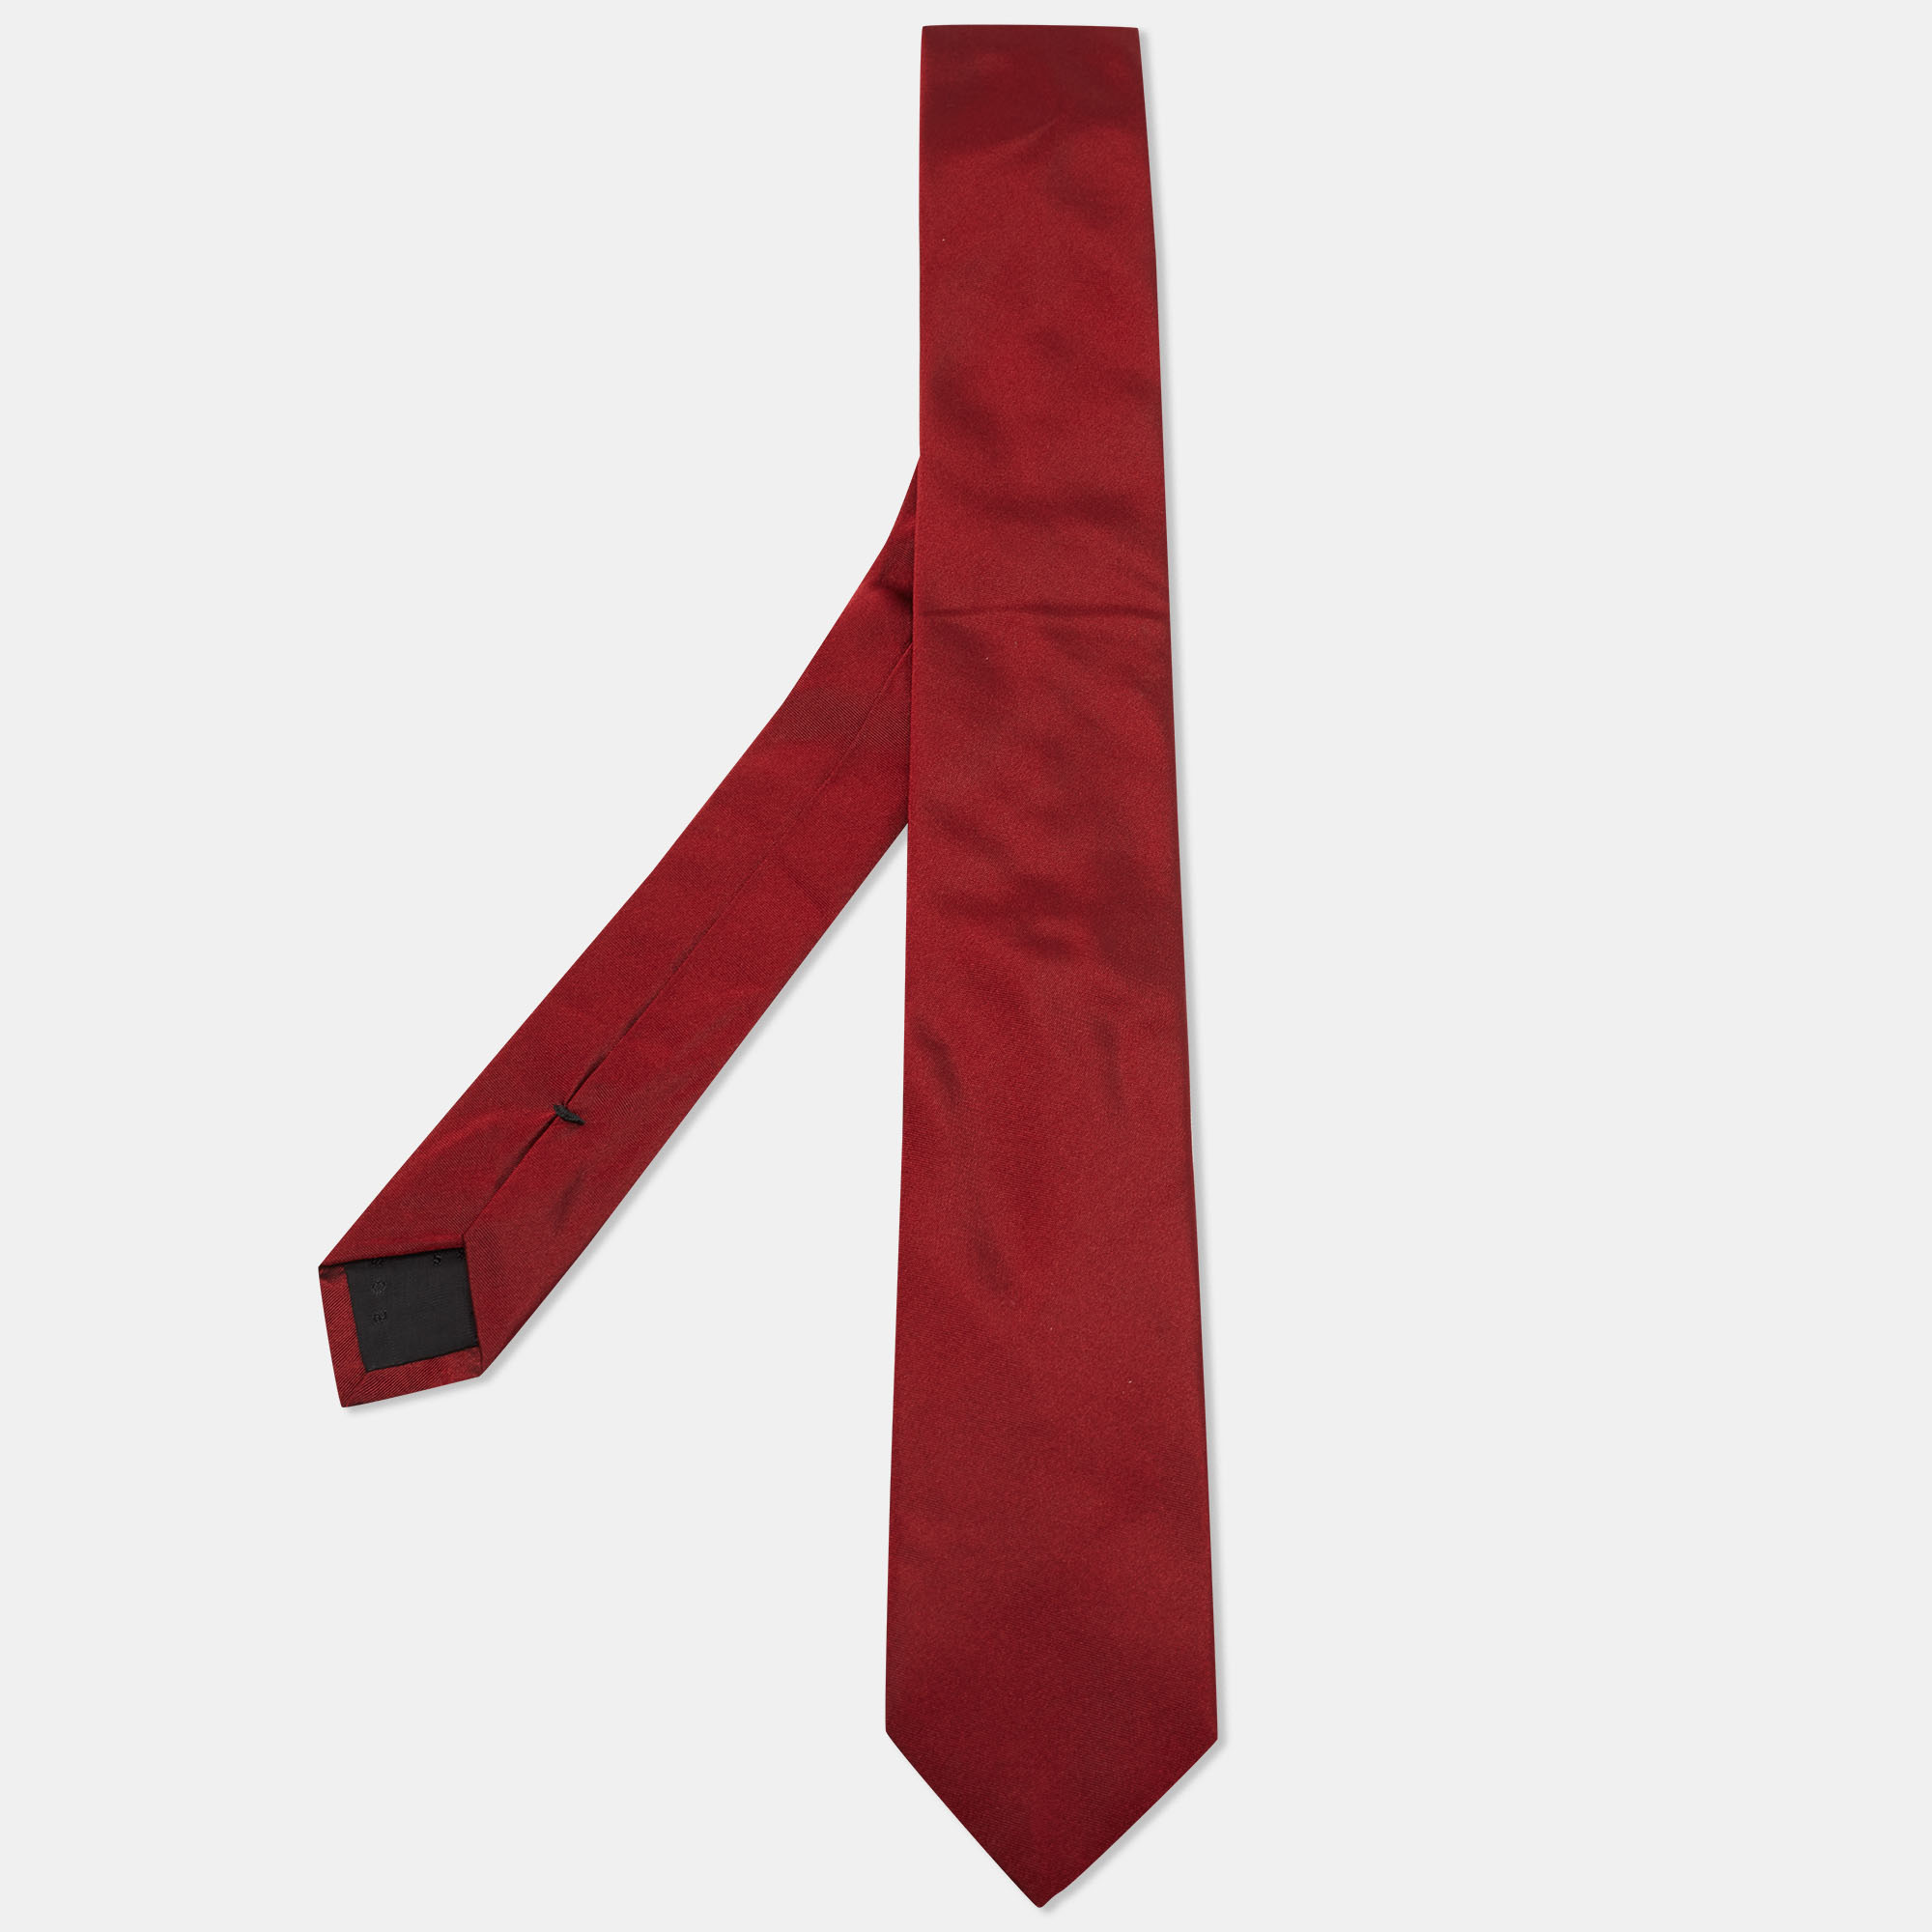 Made in Italy using 100% silk this Boss By Hugo Boss tie comes in a beautiful red shade. This finely tailored accessory will add a charming finish.